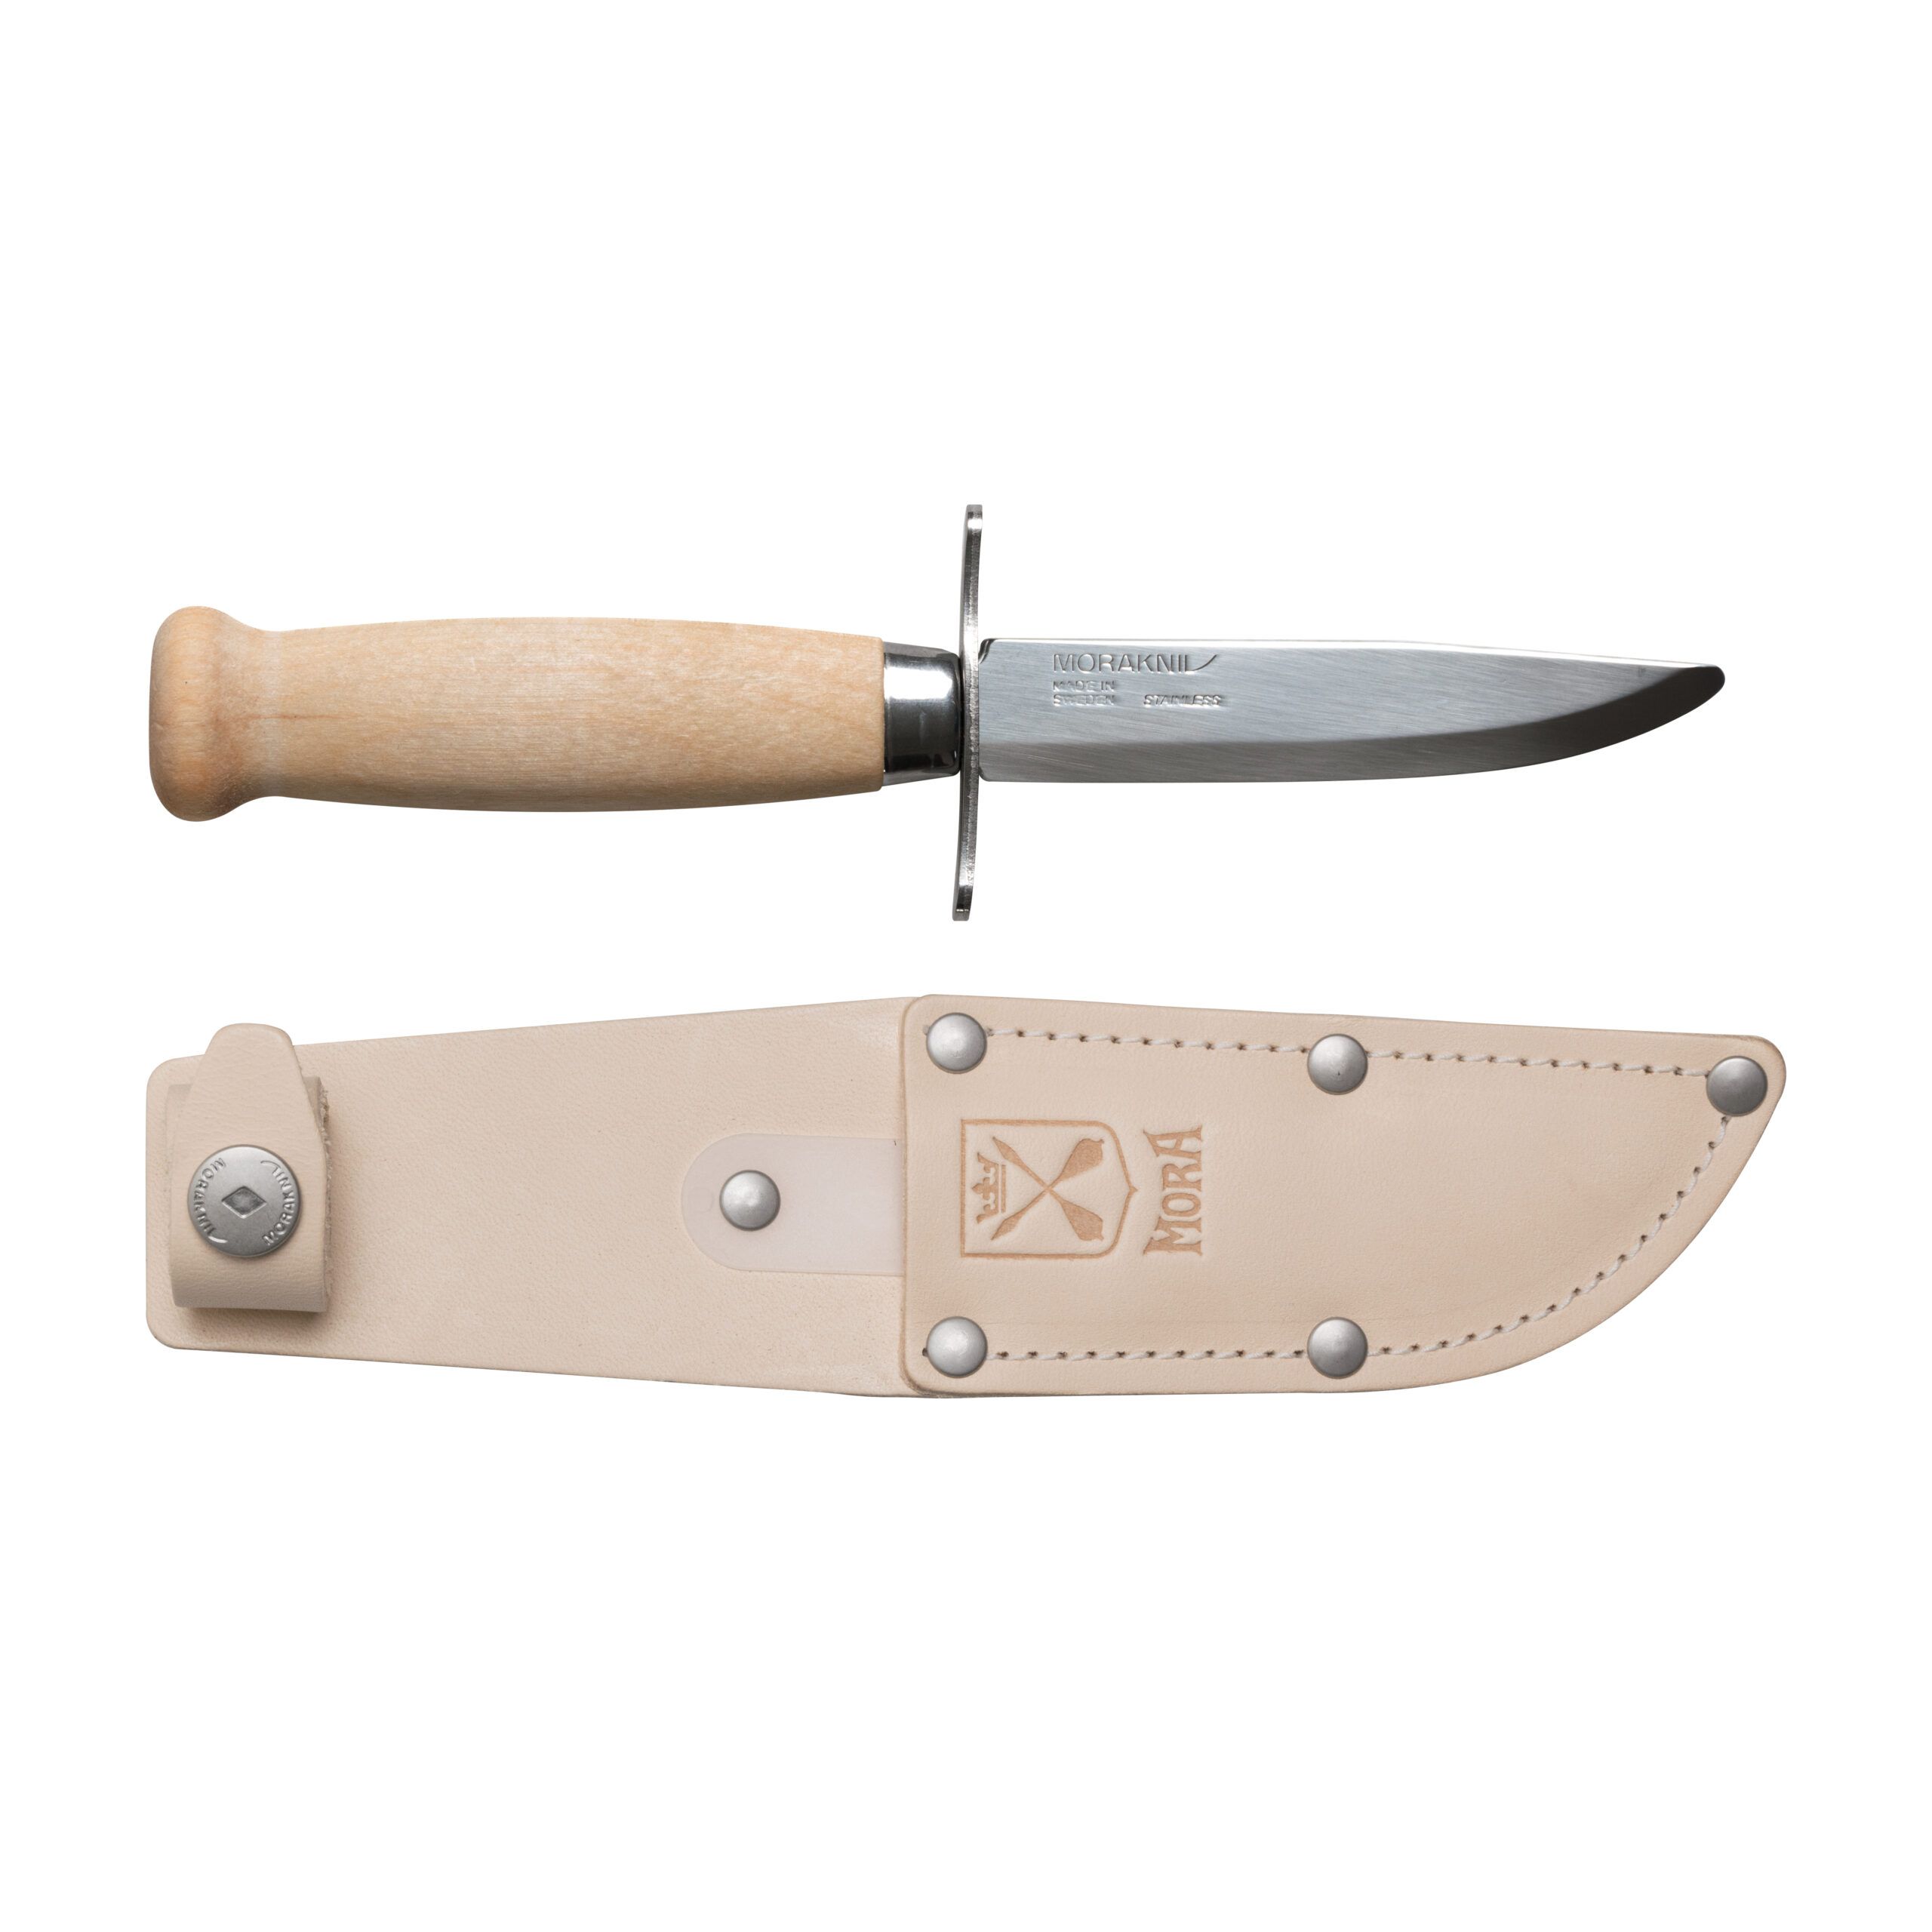 13983 - Scout 39 Safe (S) Natural knife and sheath path